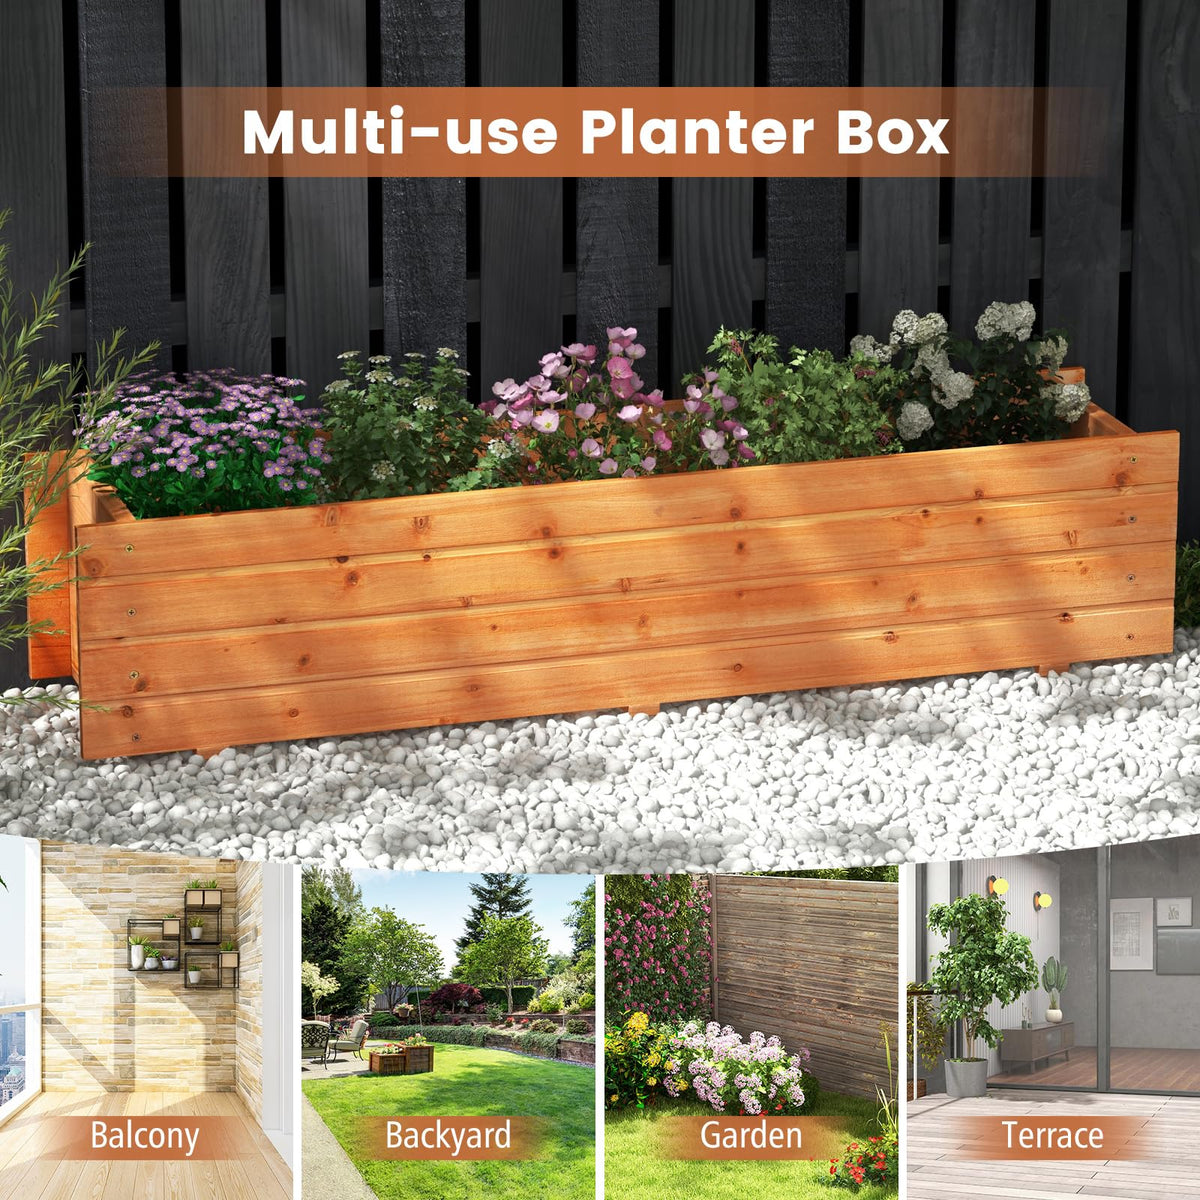 Raised Garden Bed, Fir Wood Planter Box with 2 Drainage Holes & 3 Added Bottom Crossbars